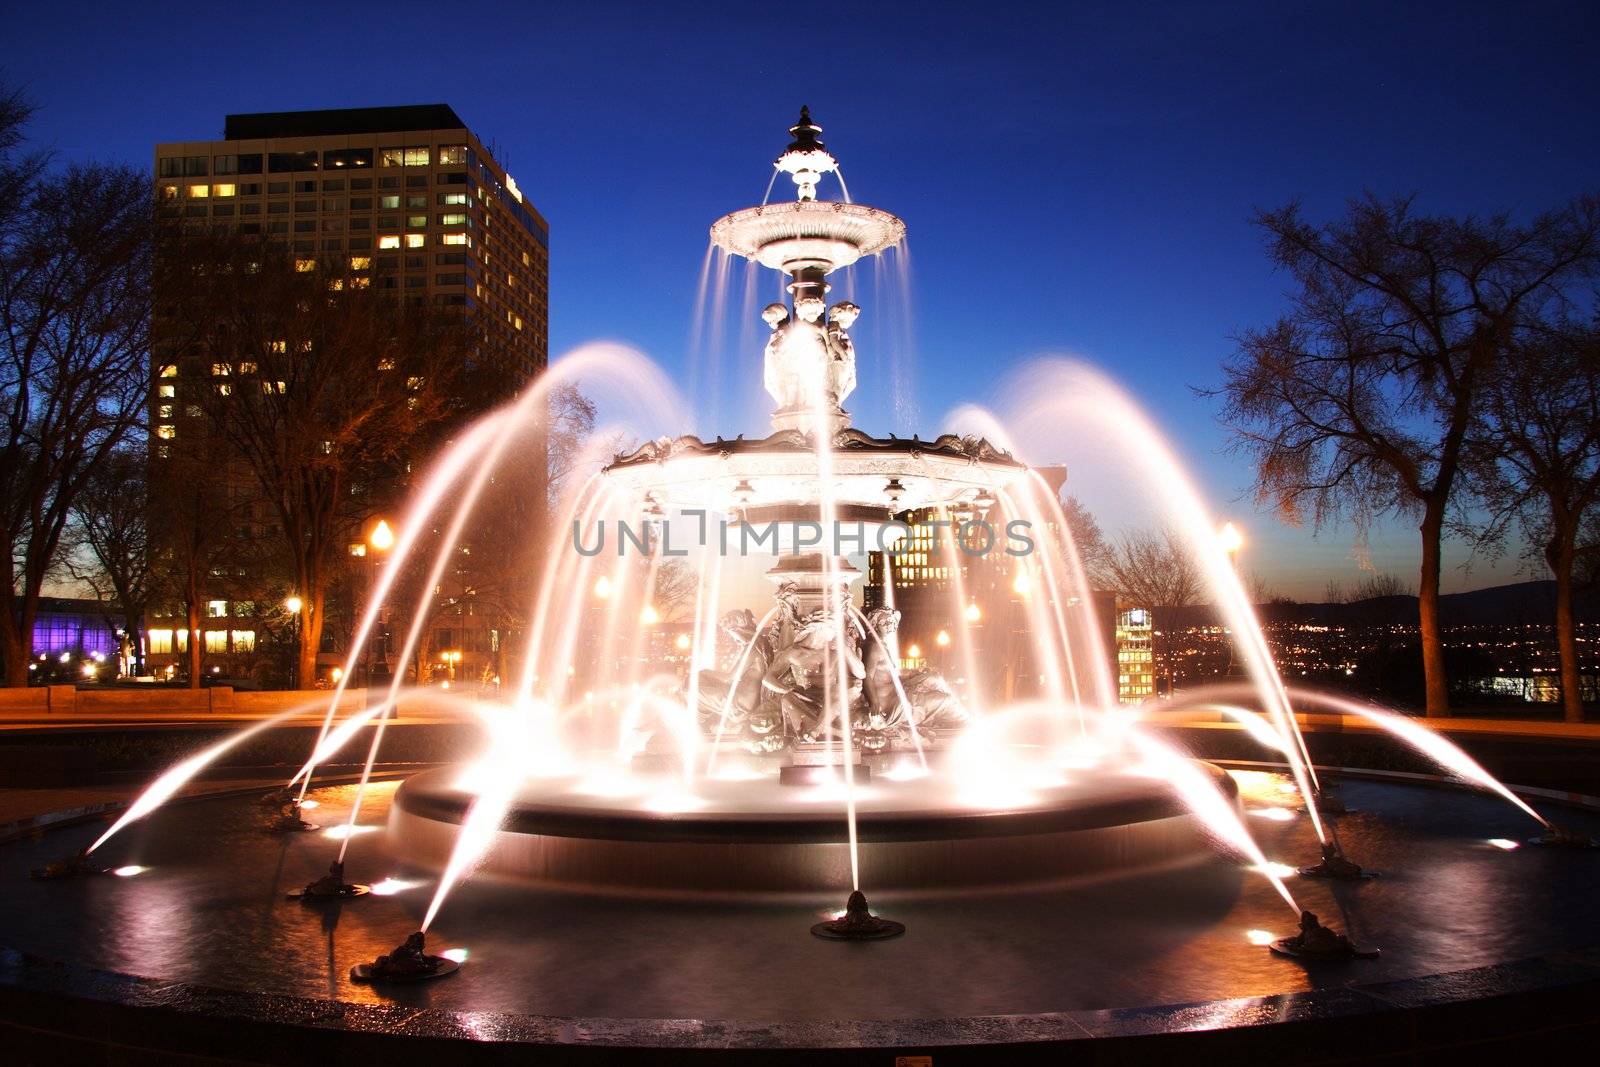 Quebec City night scene in downtown. Fountain: Fontaine de Tourny. Long exposure.